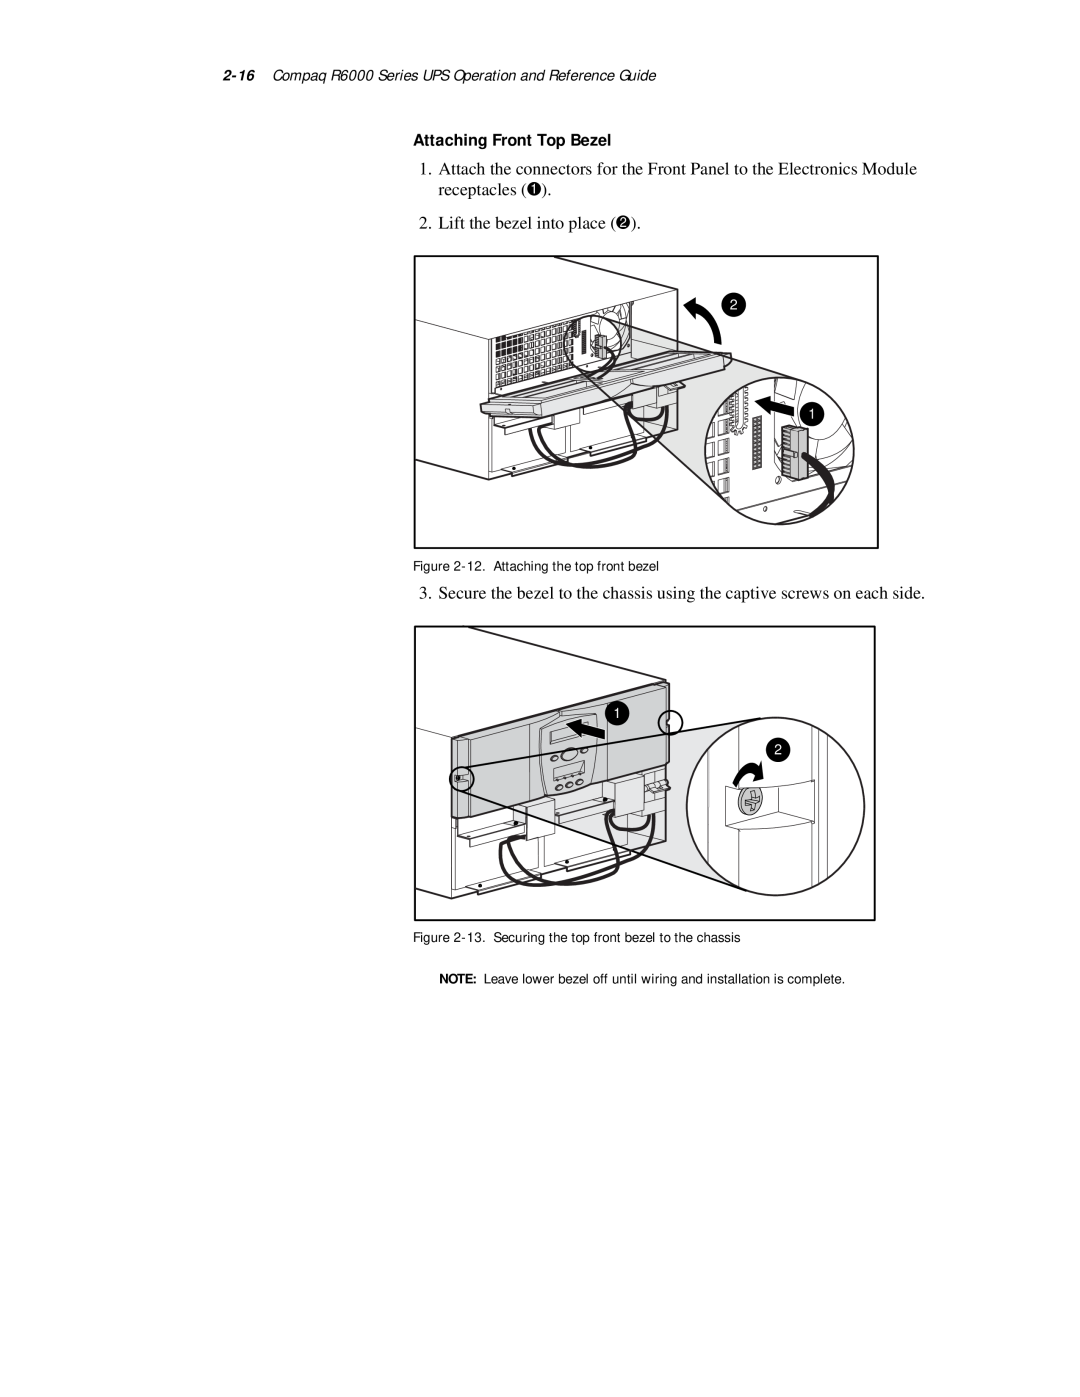 Compaq manual Attaching Front Top Bezel, Compaq R6000 Series UPS Operation and Reference Guide 